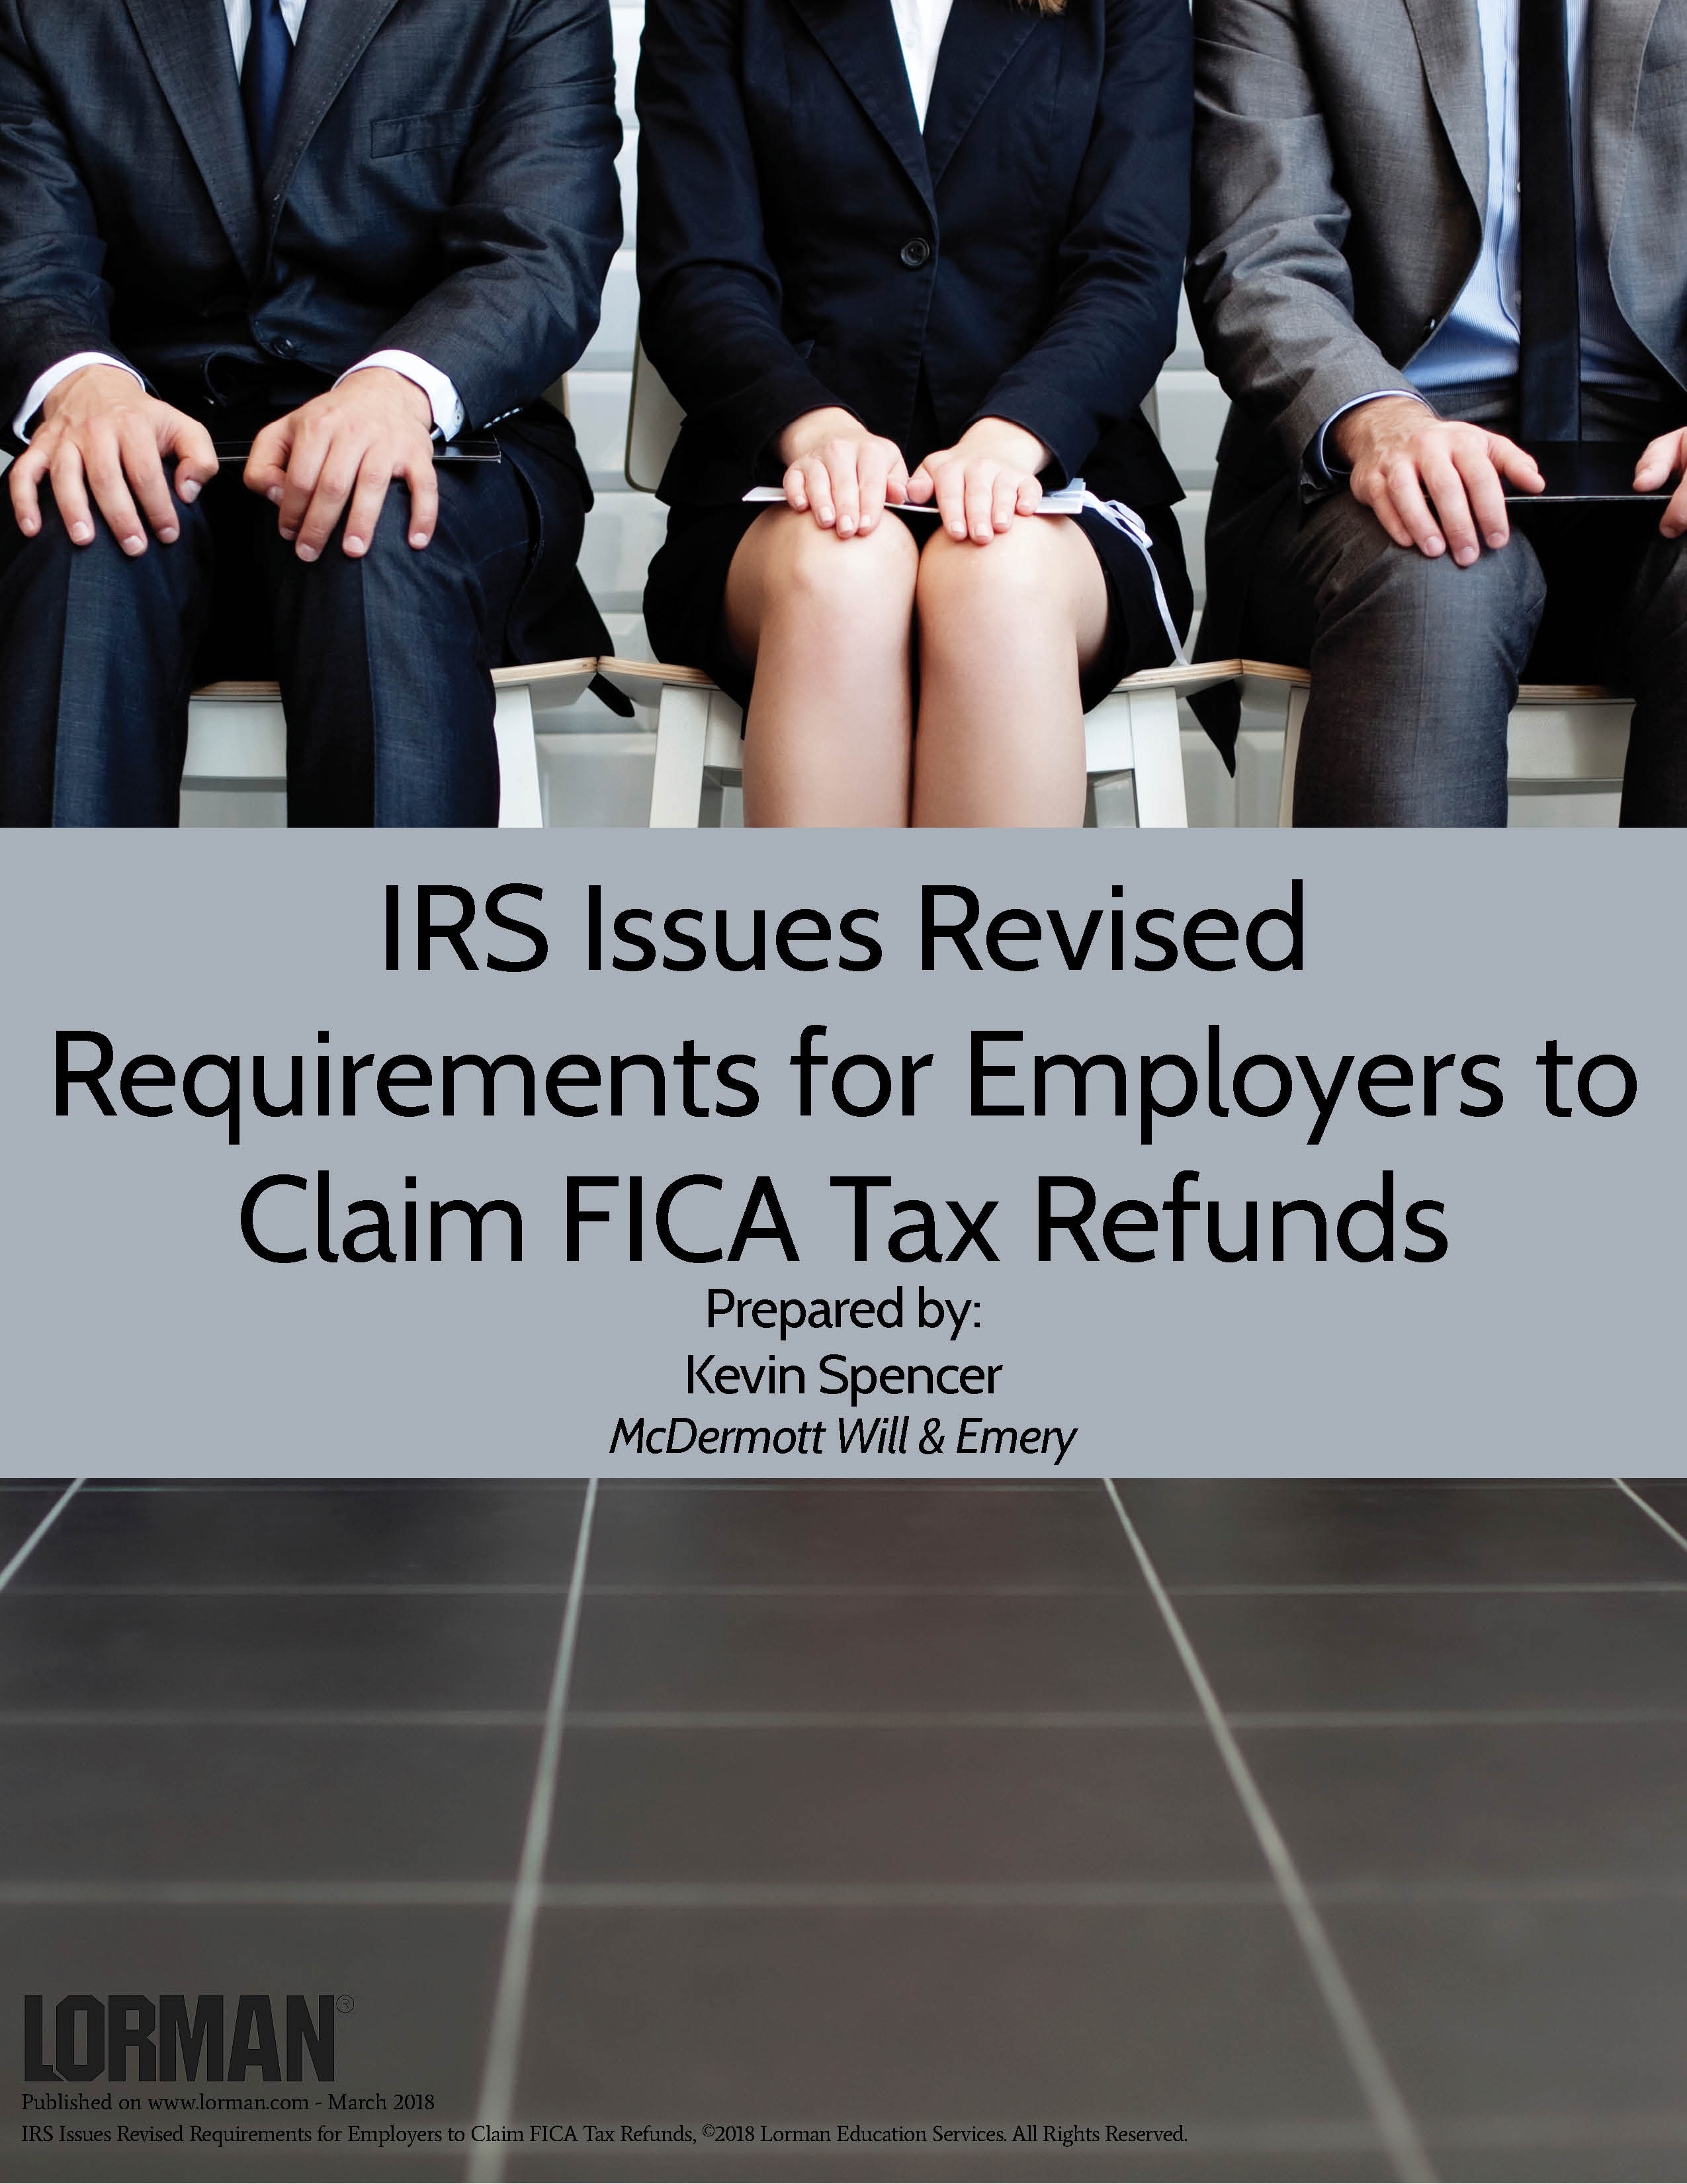 IRS Issues Revised Requirements for Employers to Claim FICA Tax Refunds 